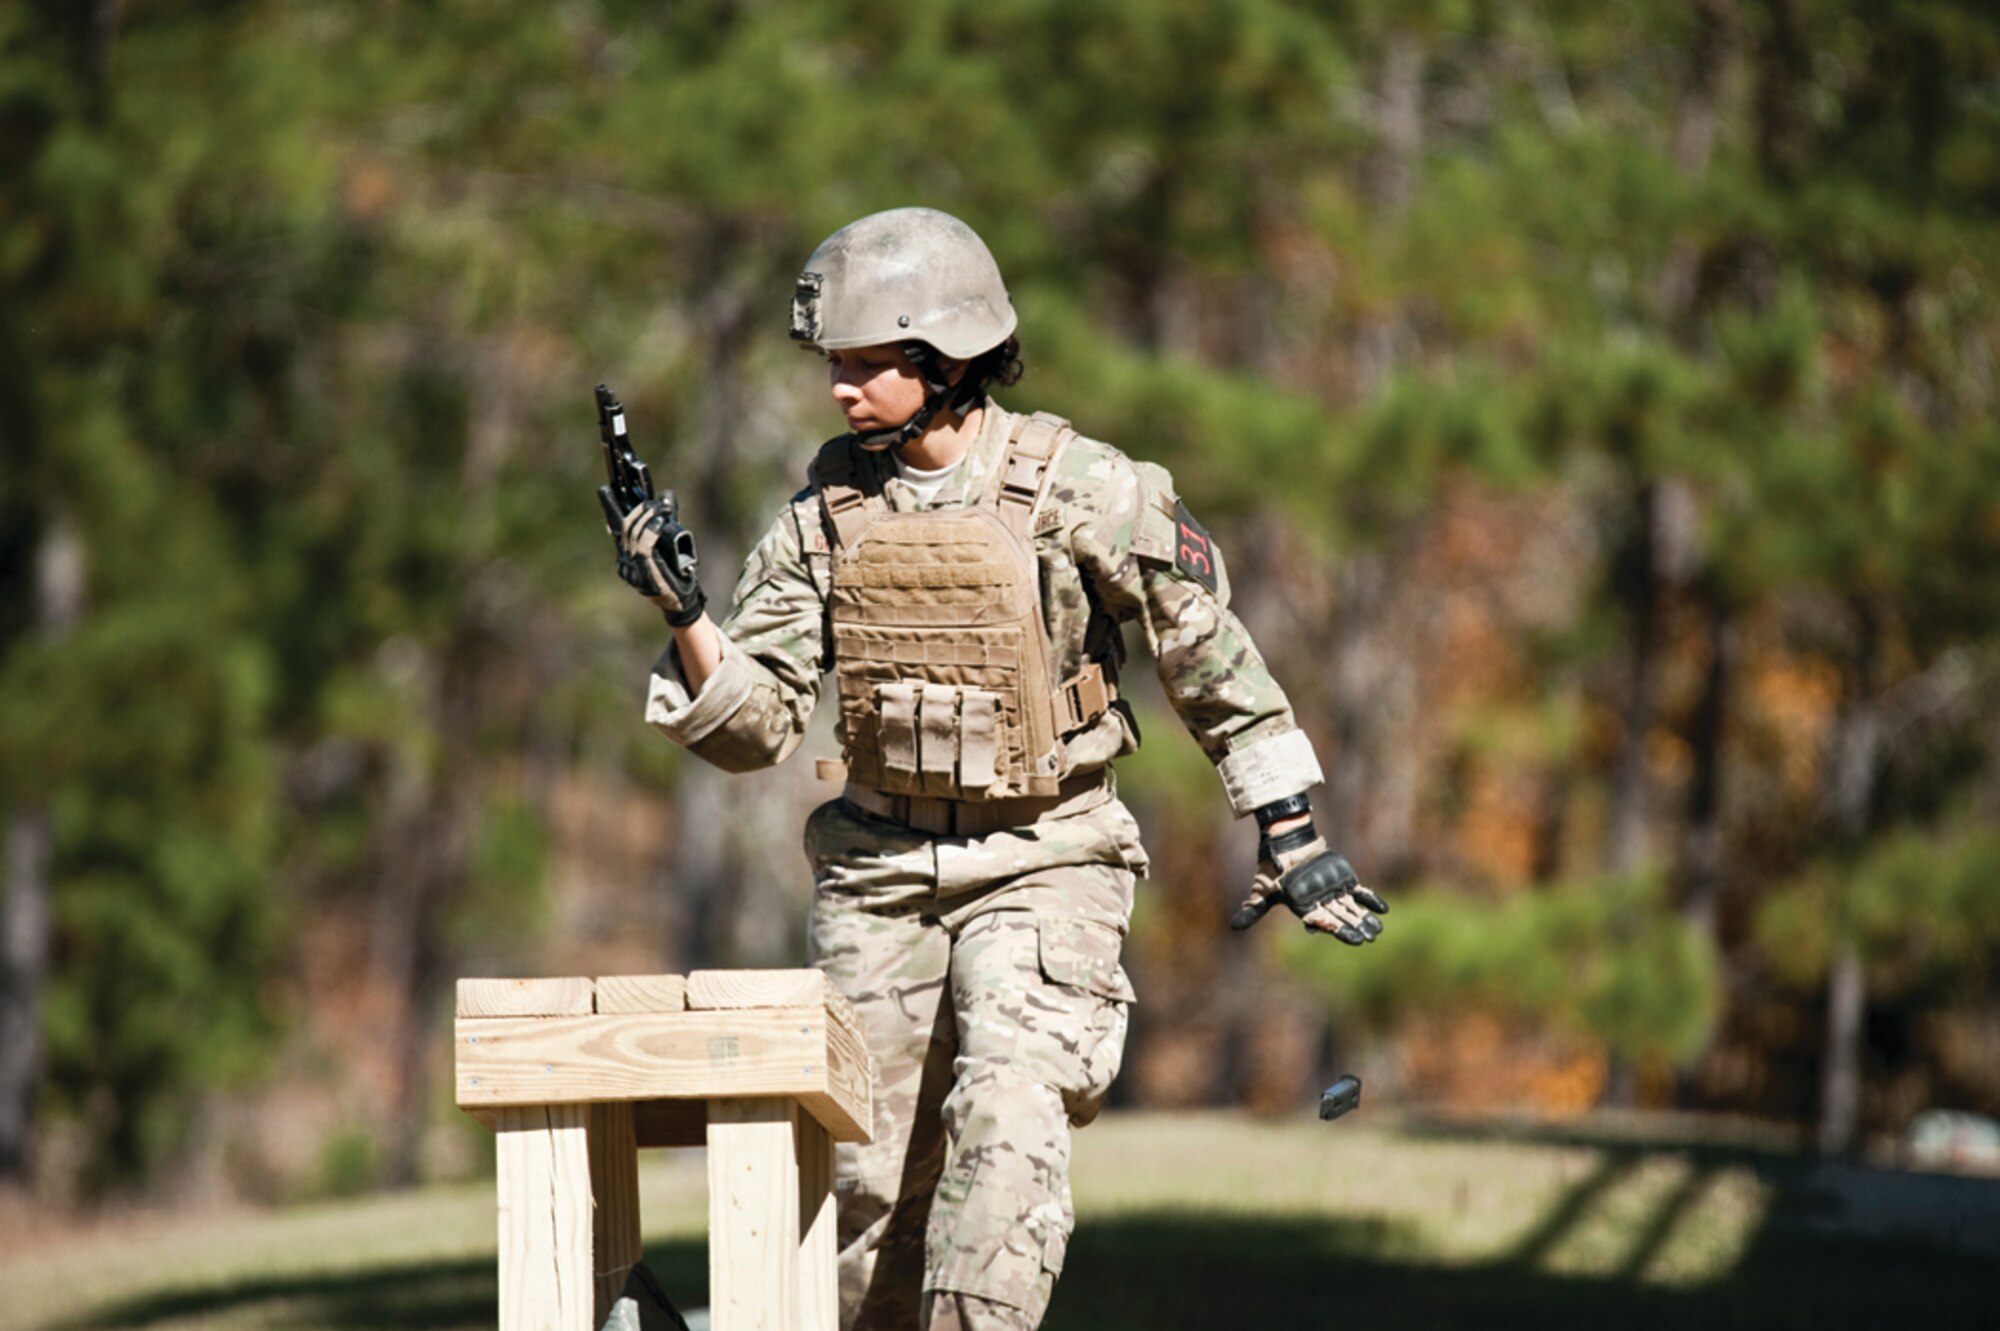 Staff Sgt. Monica Gonzalez, 620th Ground Combat Training Squadron nuclear security instructor, releases a spent clip from her M-9 pistol during an event in the 2012 International Sniper Competition at Fort Benning, Ga., which took place Nov. 2 through 5. (Courtsey photo)